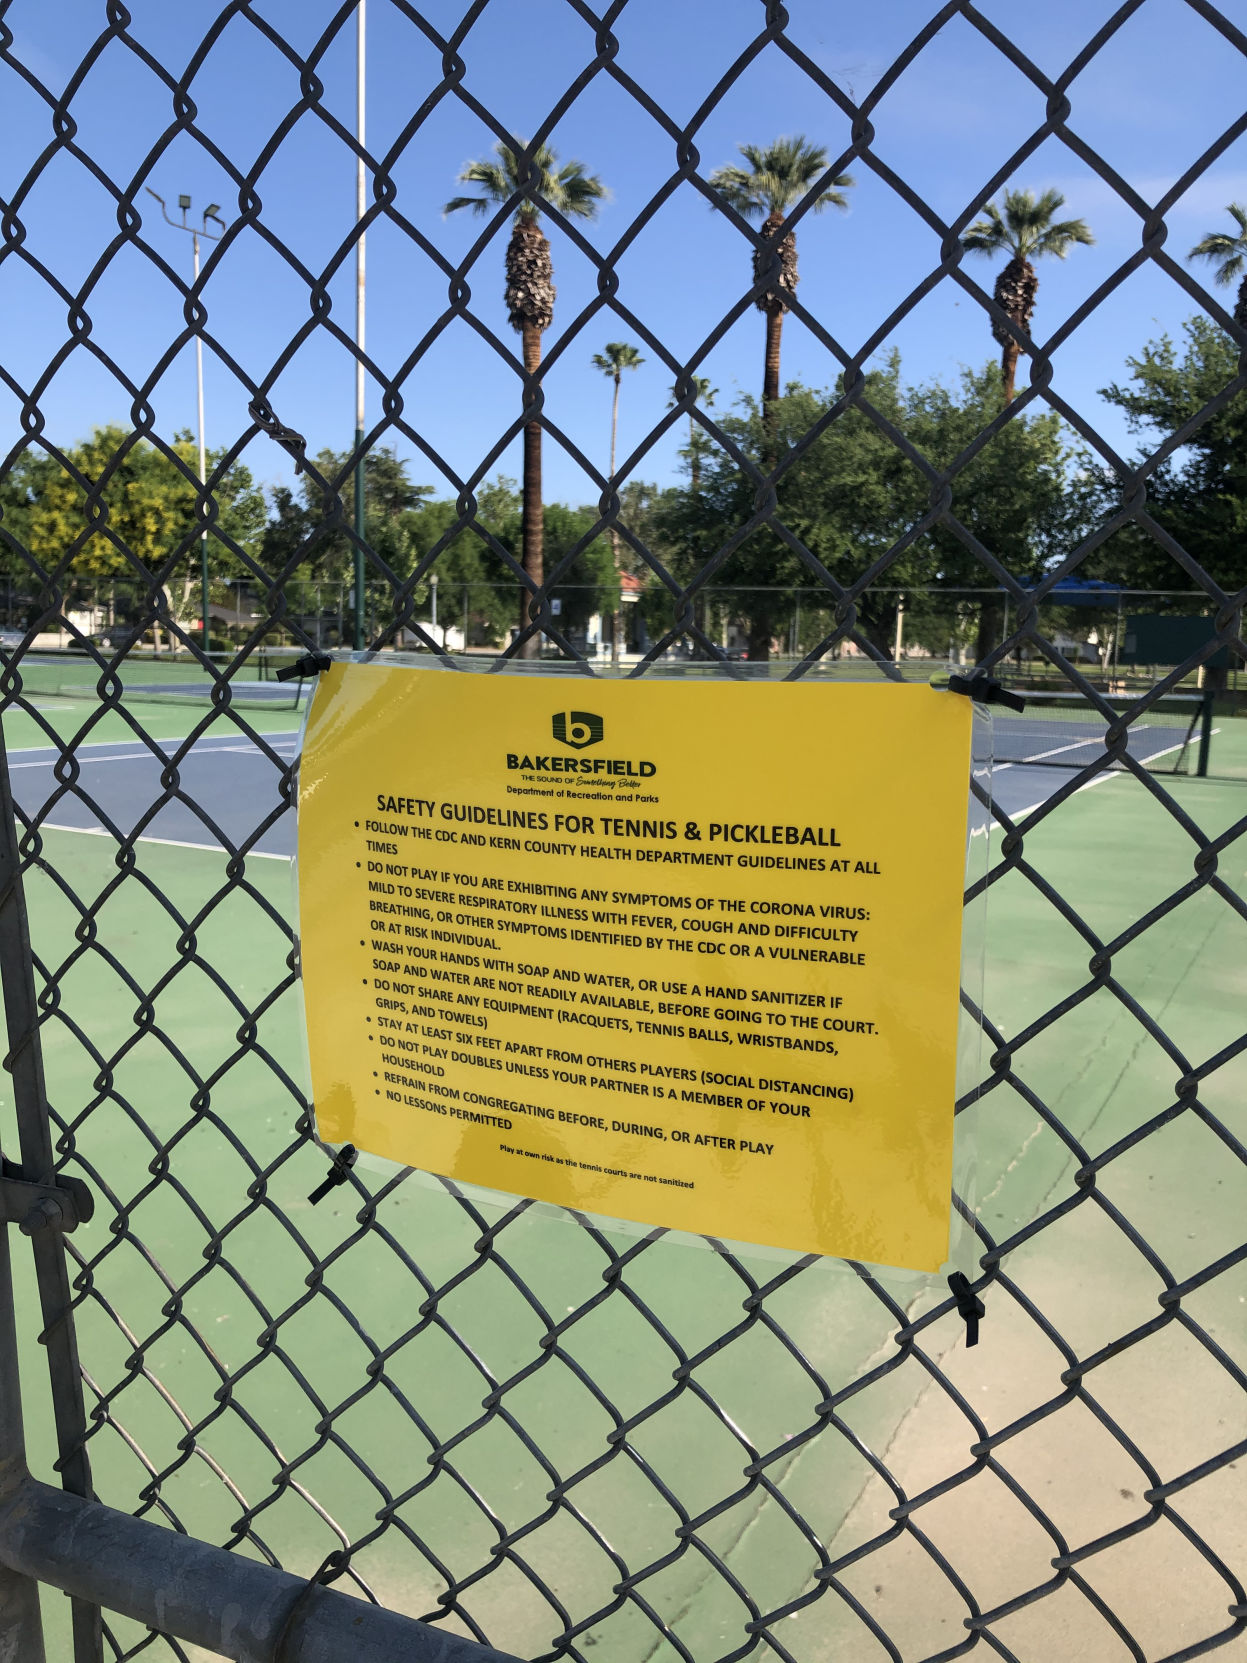 Tennis courts reopen in Bakersfield city parks News bakersfield com